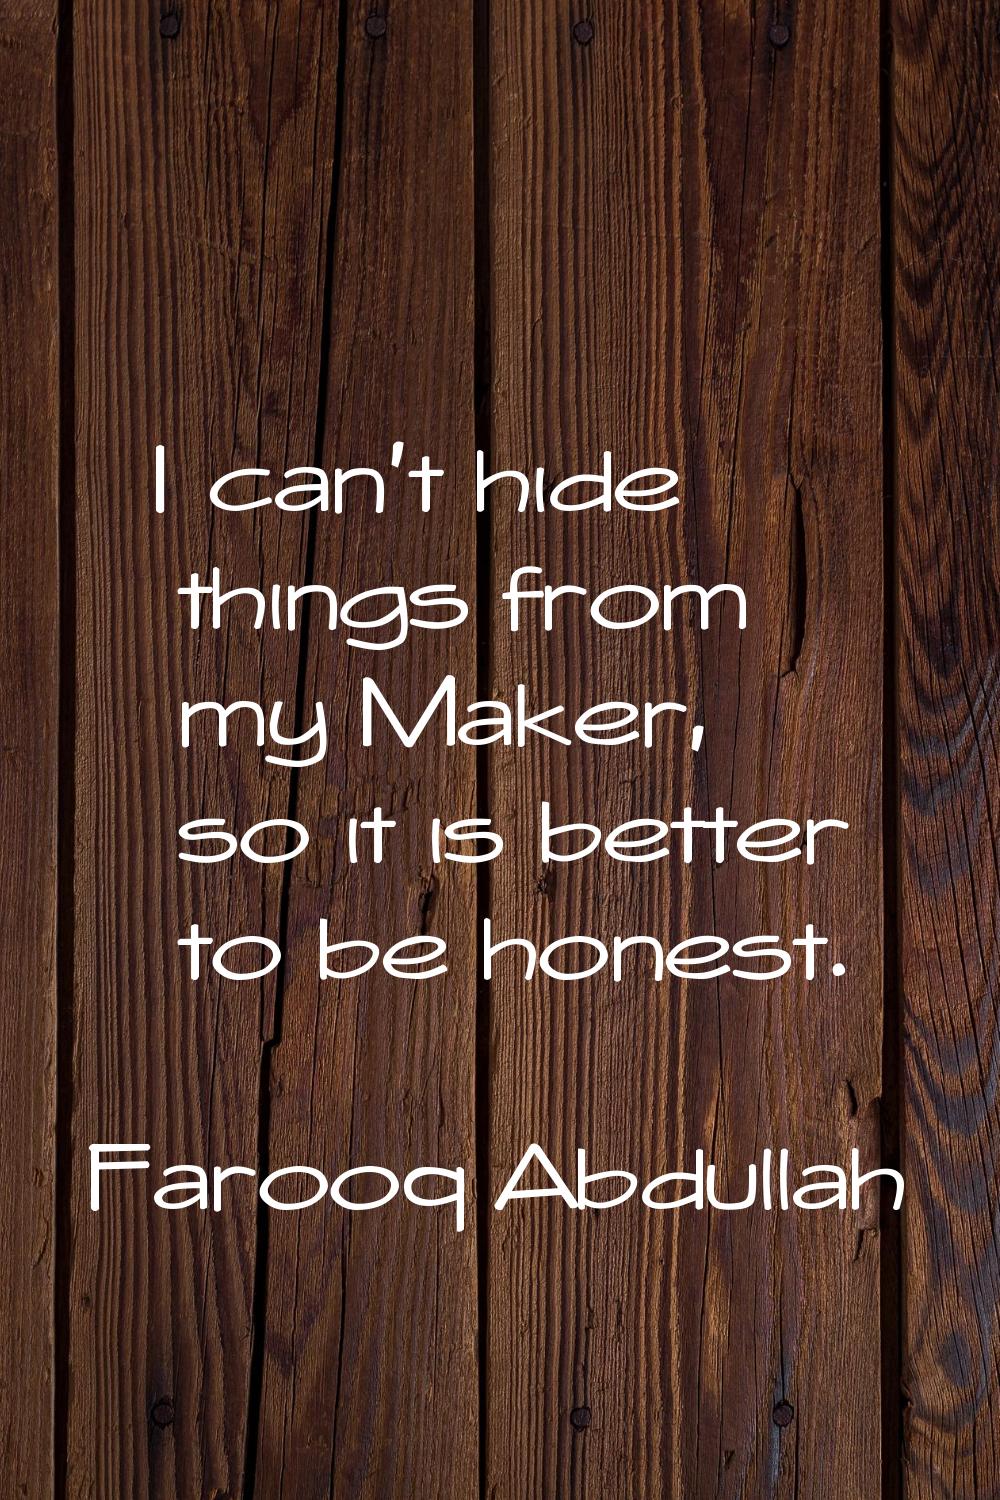 I can't hide things from my Maker, so it is better to be honest.